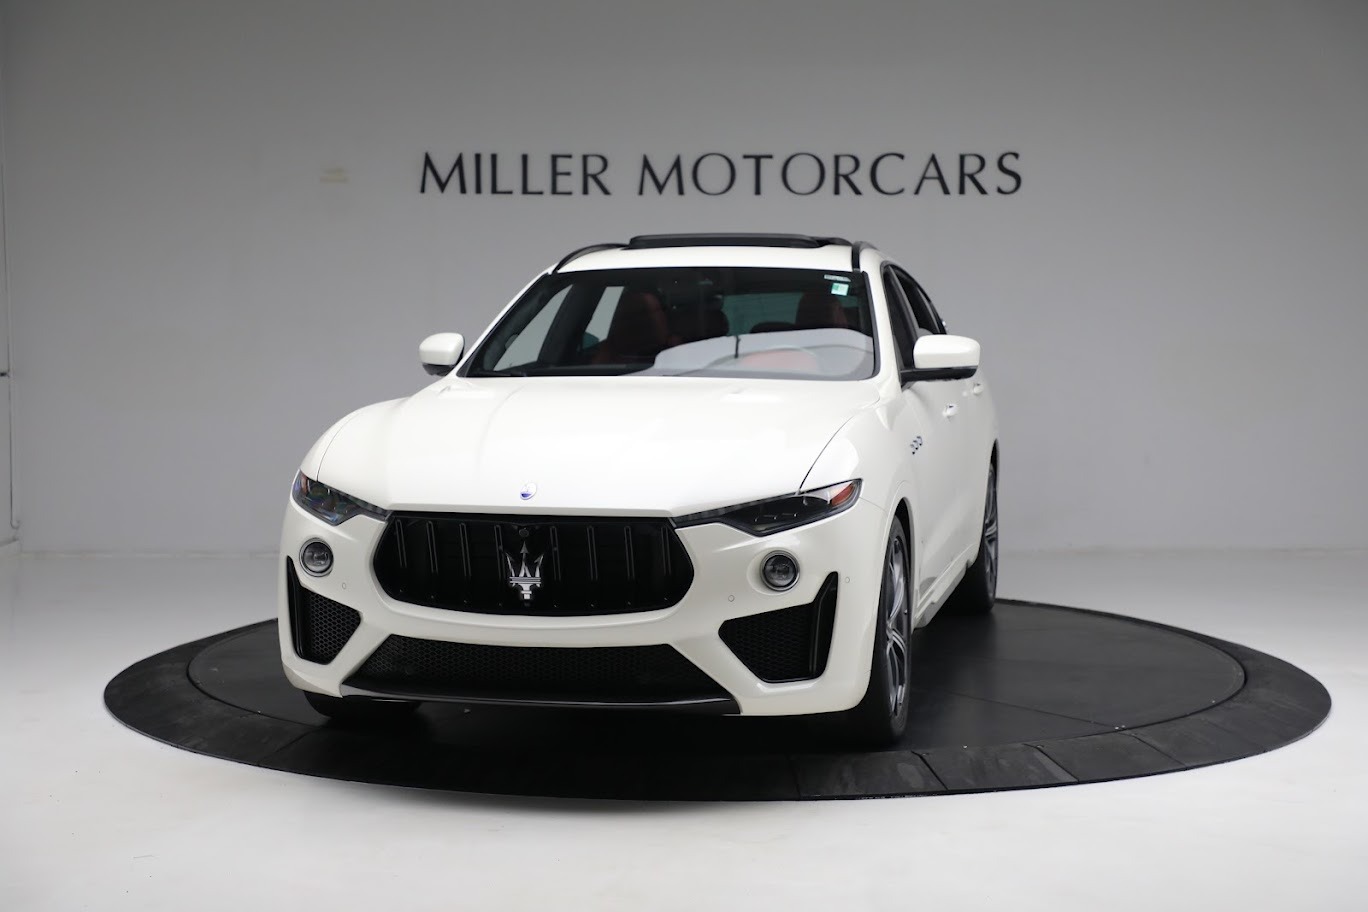 Used 2019 Maserati Levante TROFEO for sale $119,900 at Bentley Greenwich in Greenwich CT 06830 1